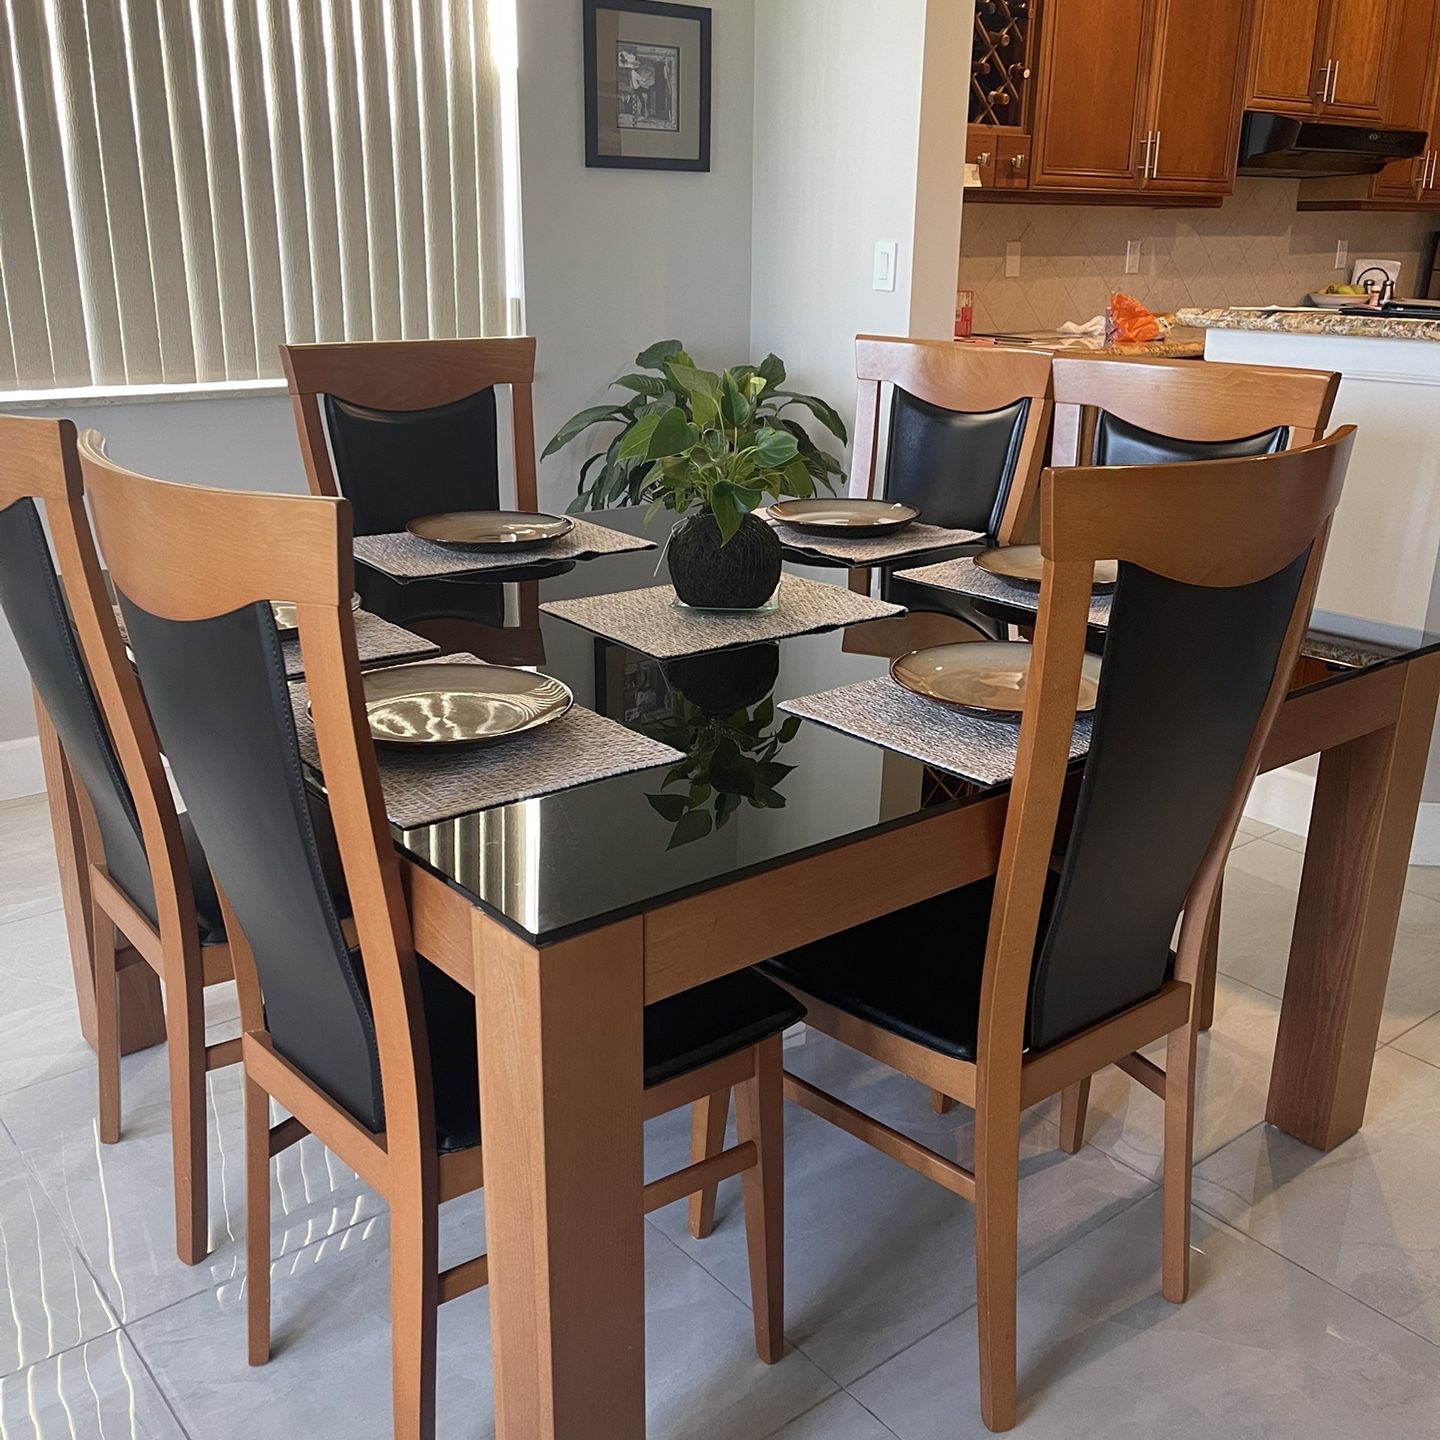 Six(6) Chairs Dining Room Set